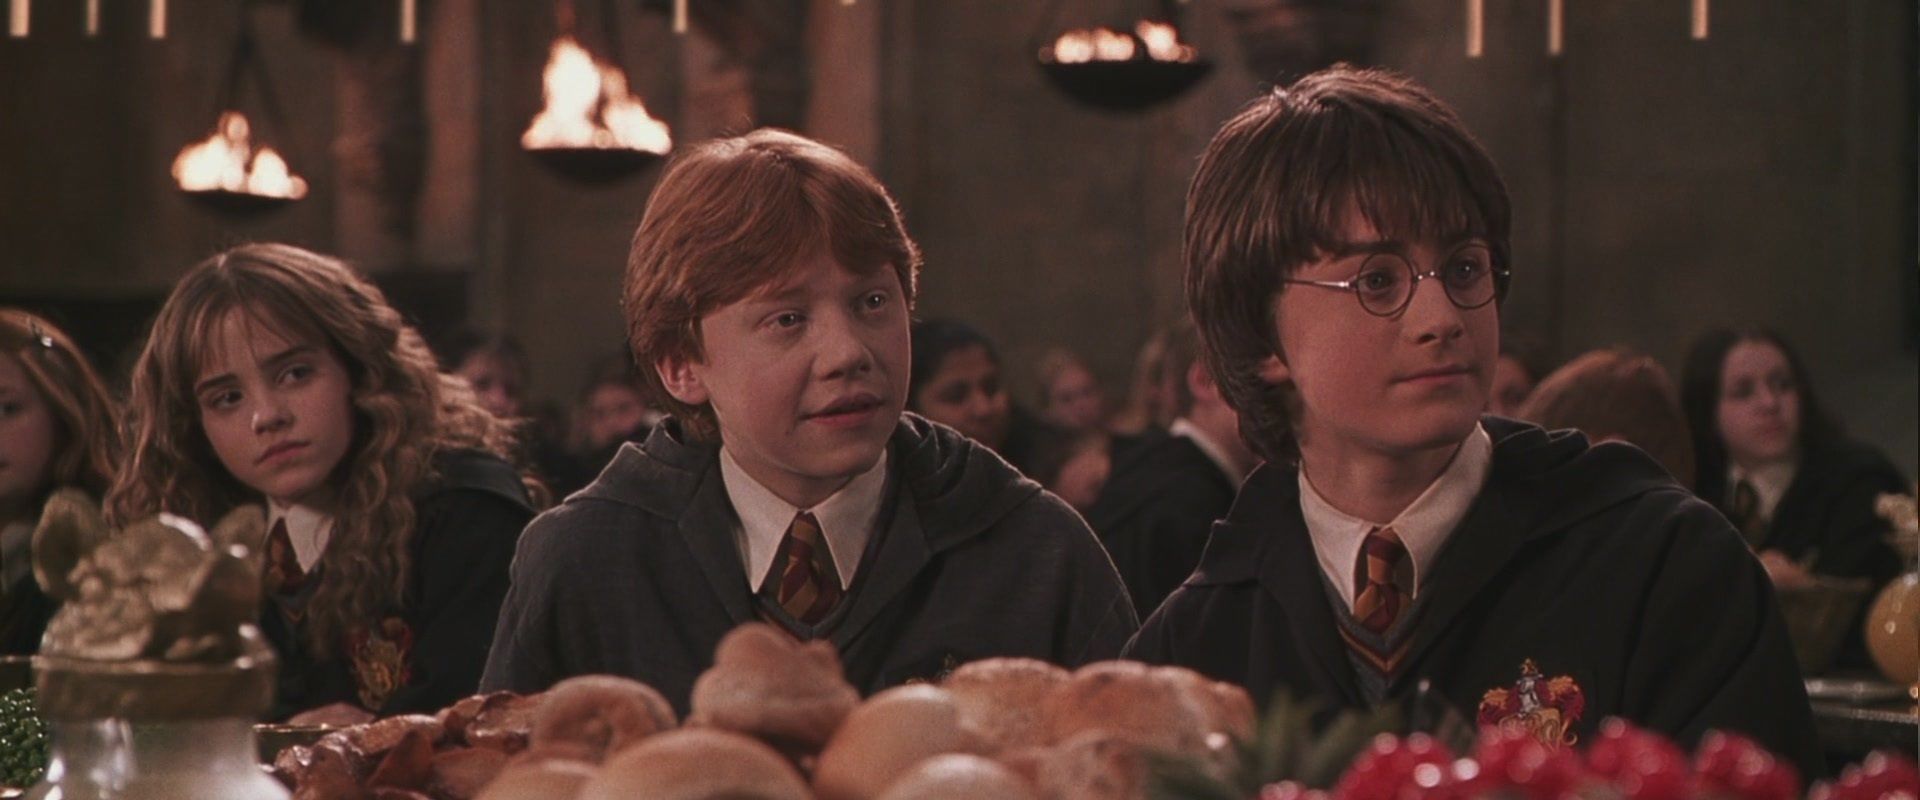 1920x800px Harry Potter And The Chamber Of Secrets 183.54 KB